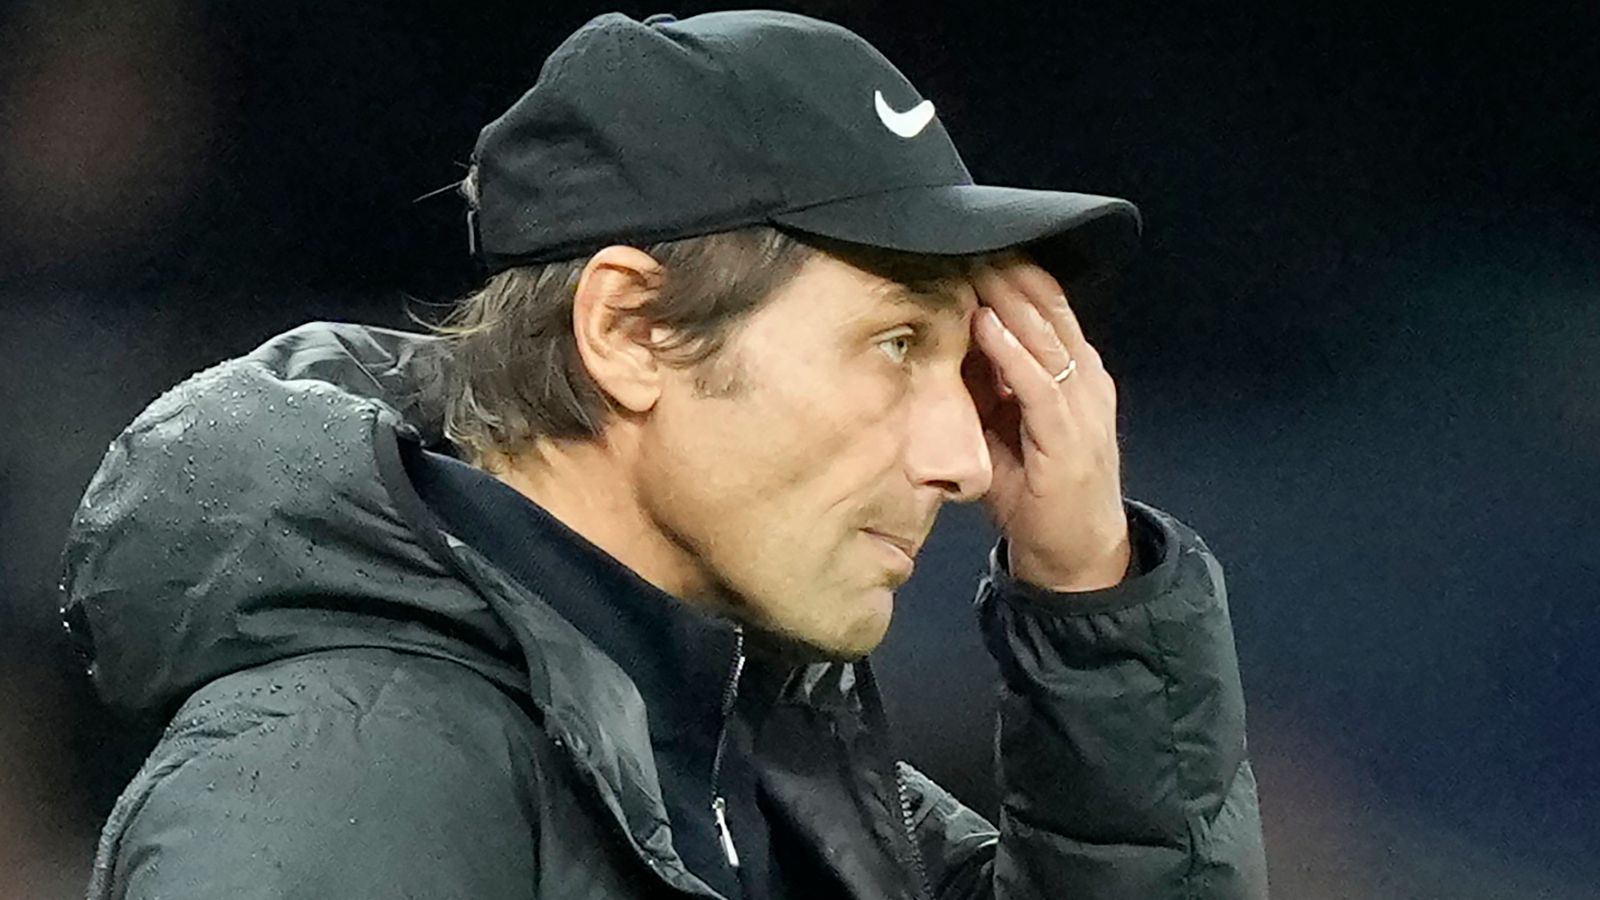 Antonio Conte admits Tottenham 'cannot work miracles' after Newcastle defeat as Jamie Redknapp questions delayed contract talks